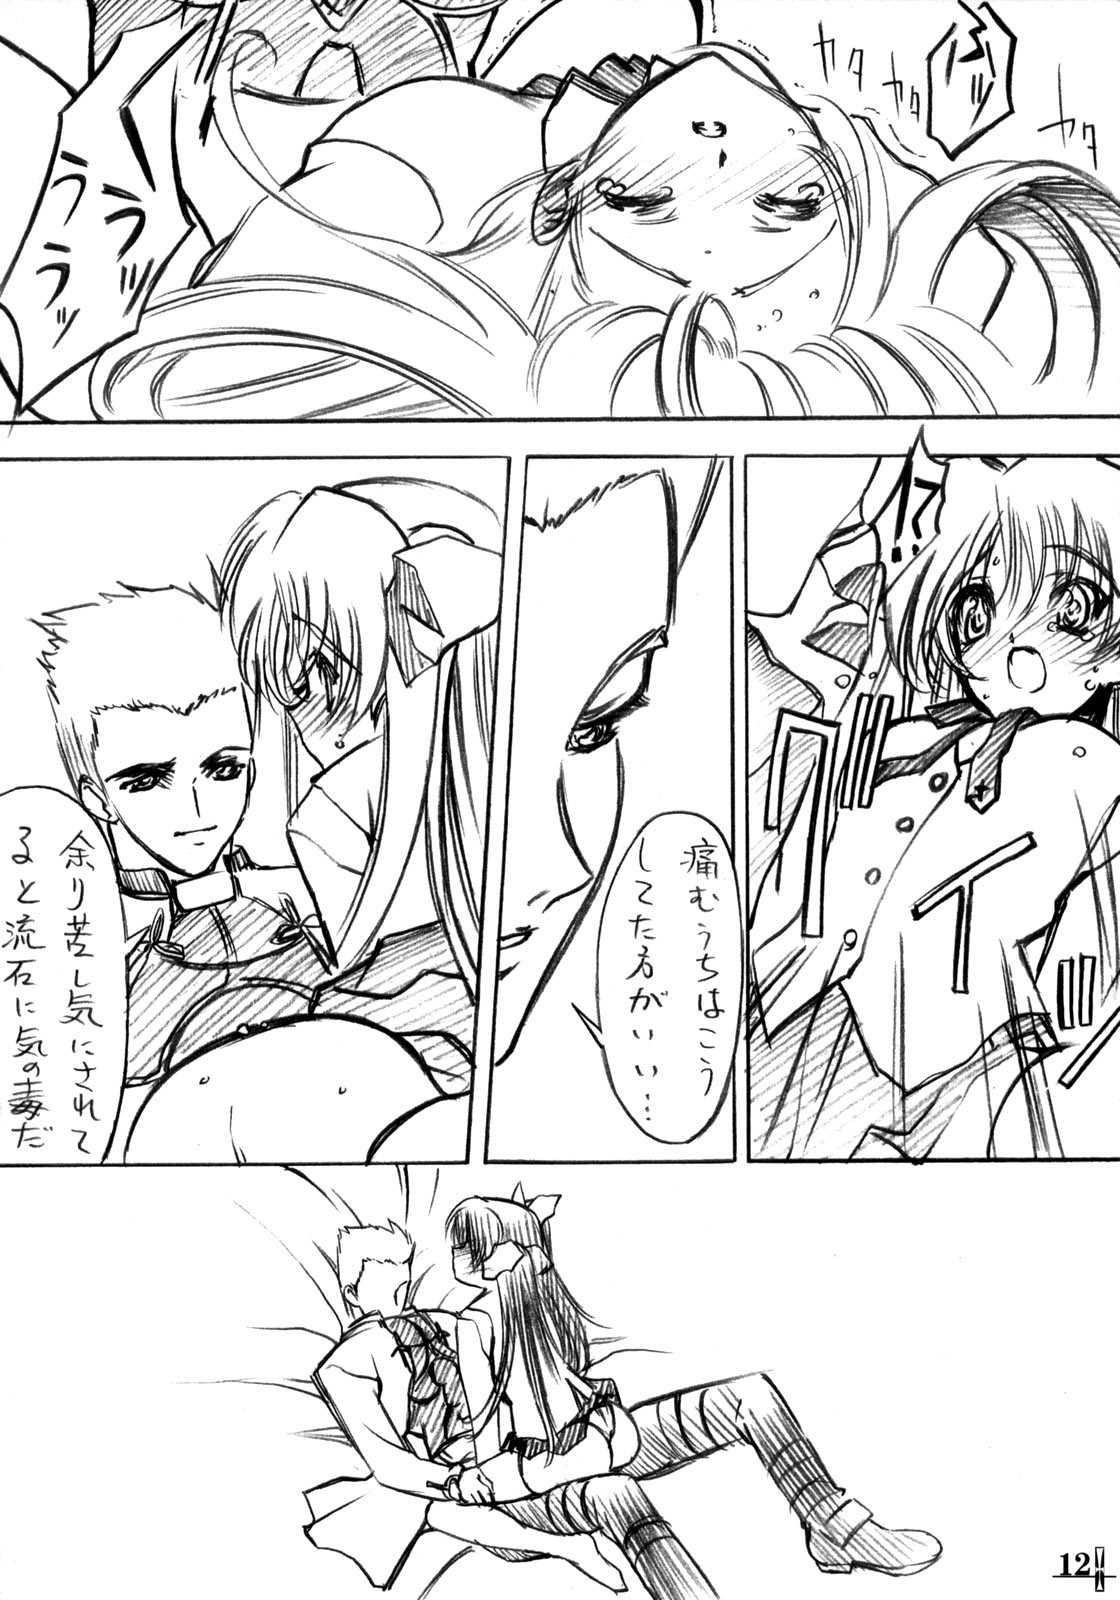 Blowjob Seven Cardinal Sins みりおんばんく - Fate stay night Jerk - Page 11